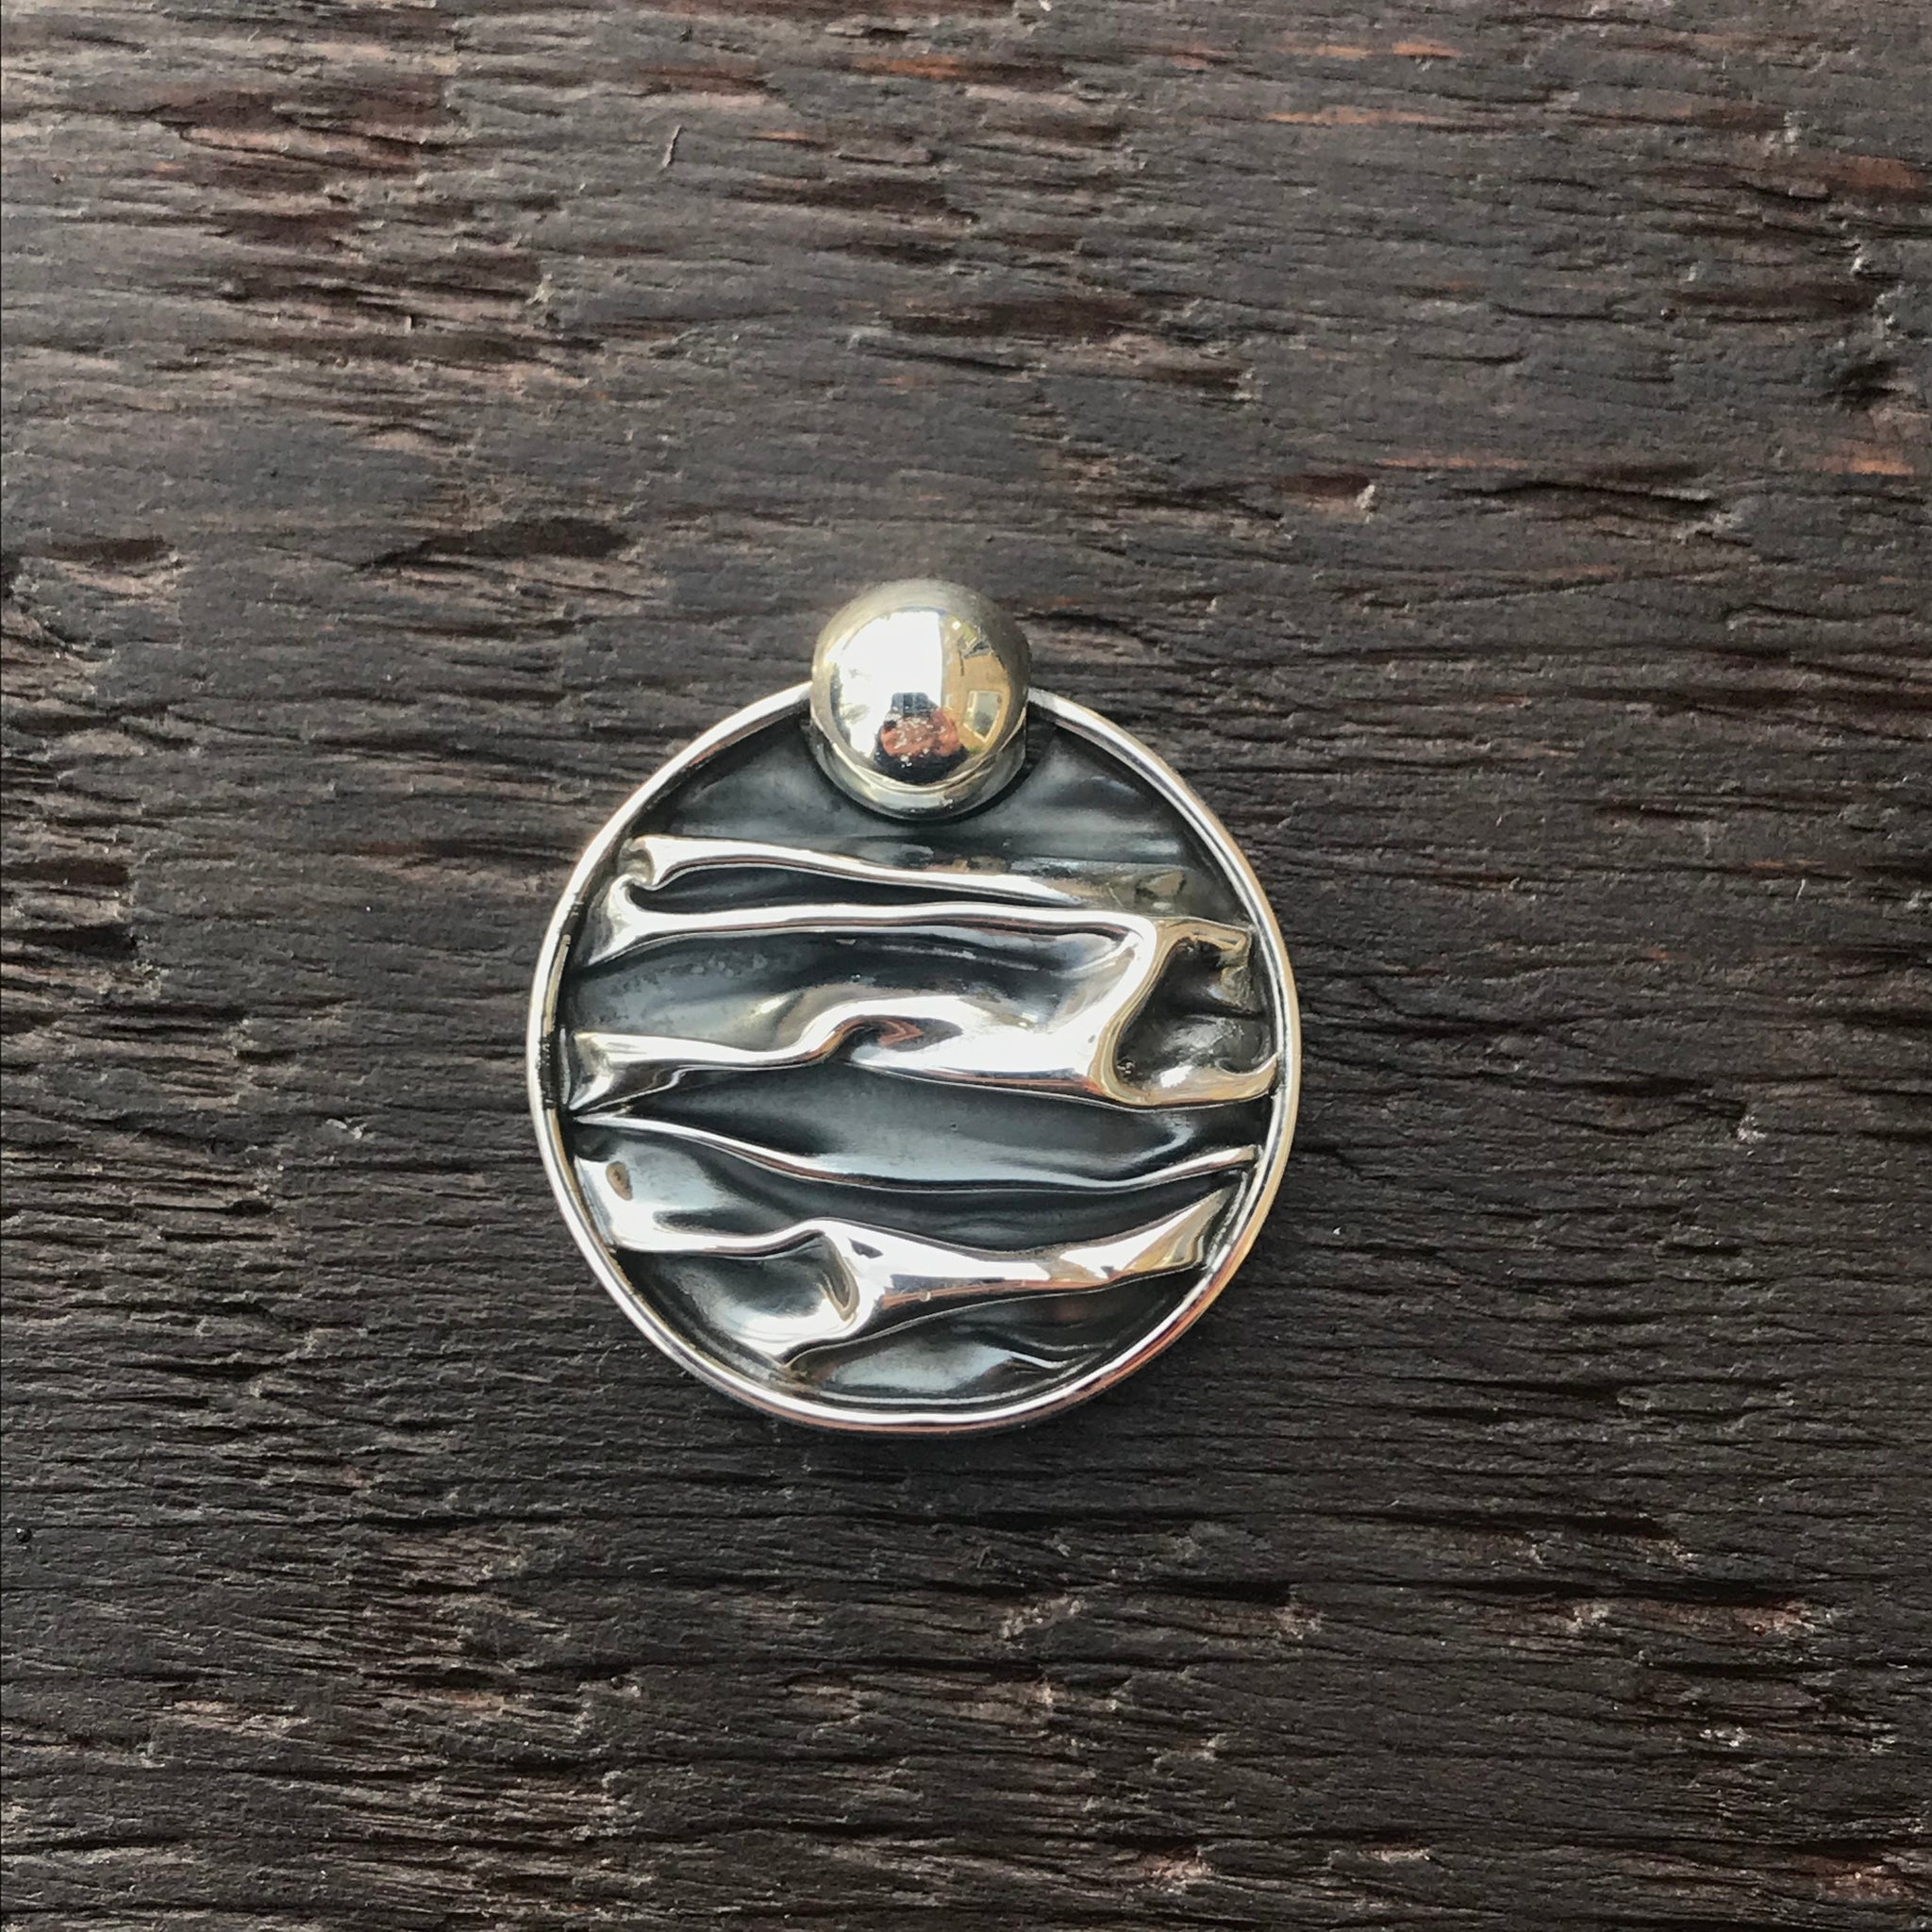 'Rocks' Round Silver Tipped 925 Sterling Silver Pendant